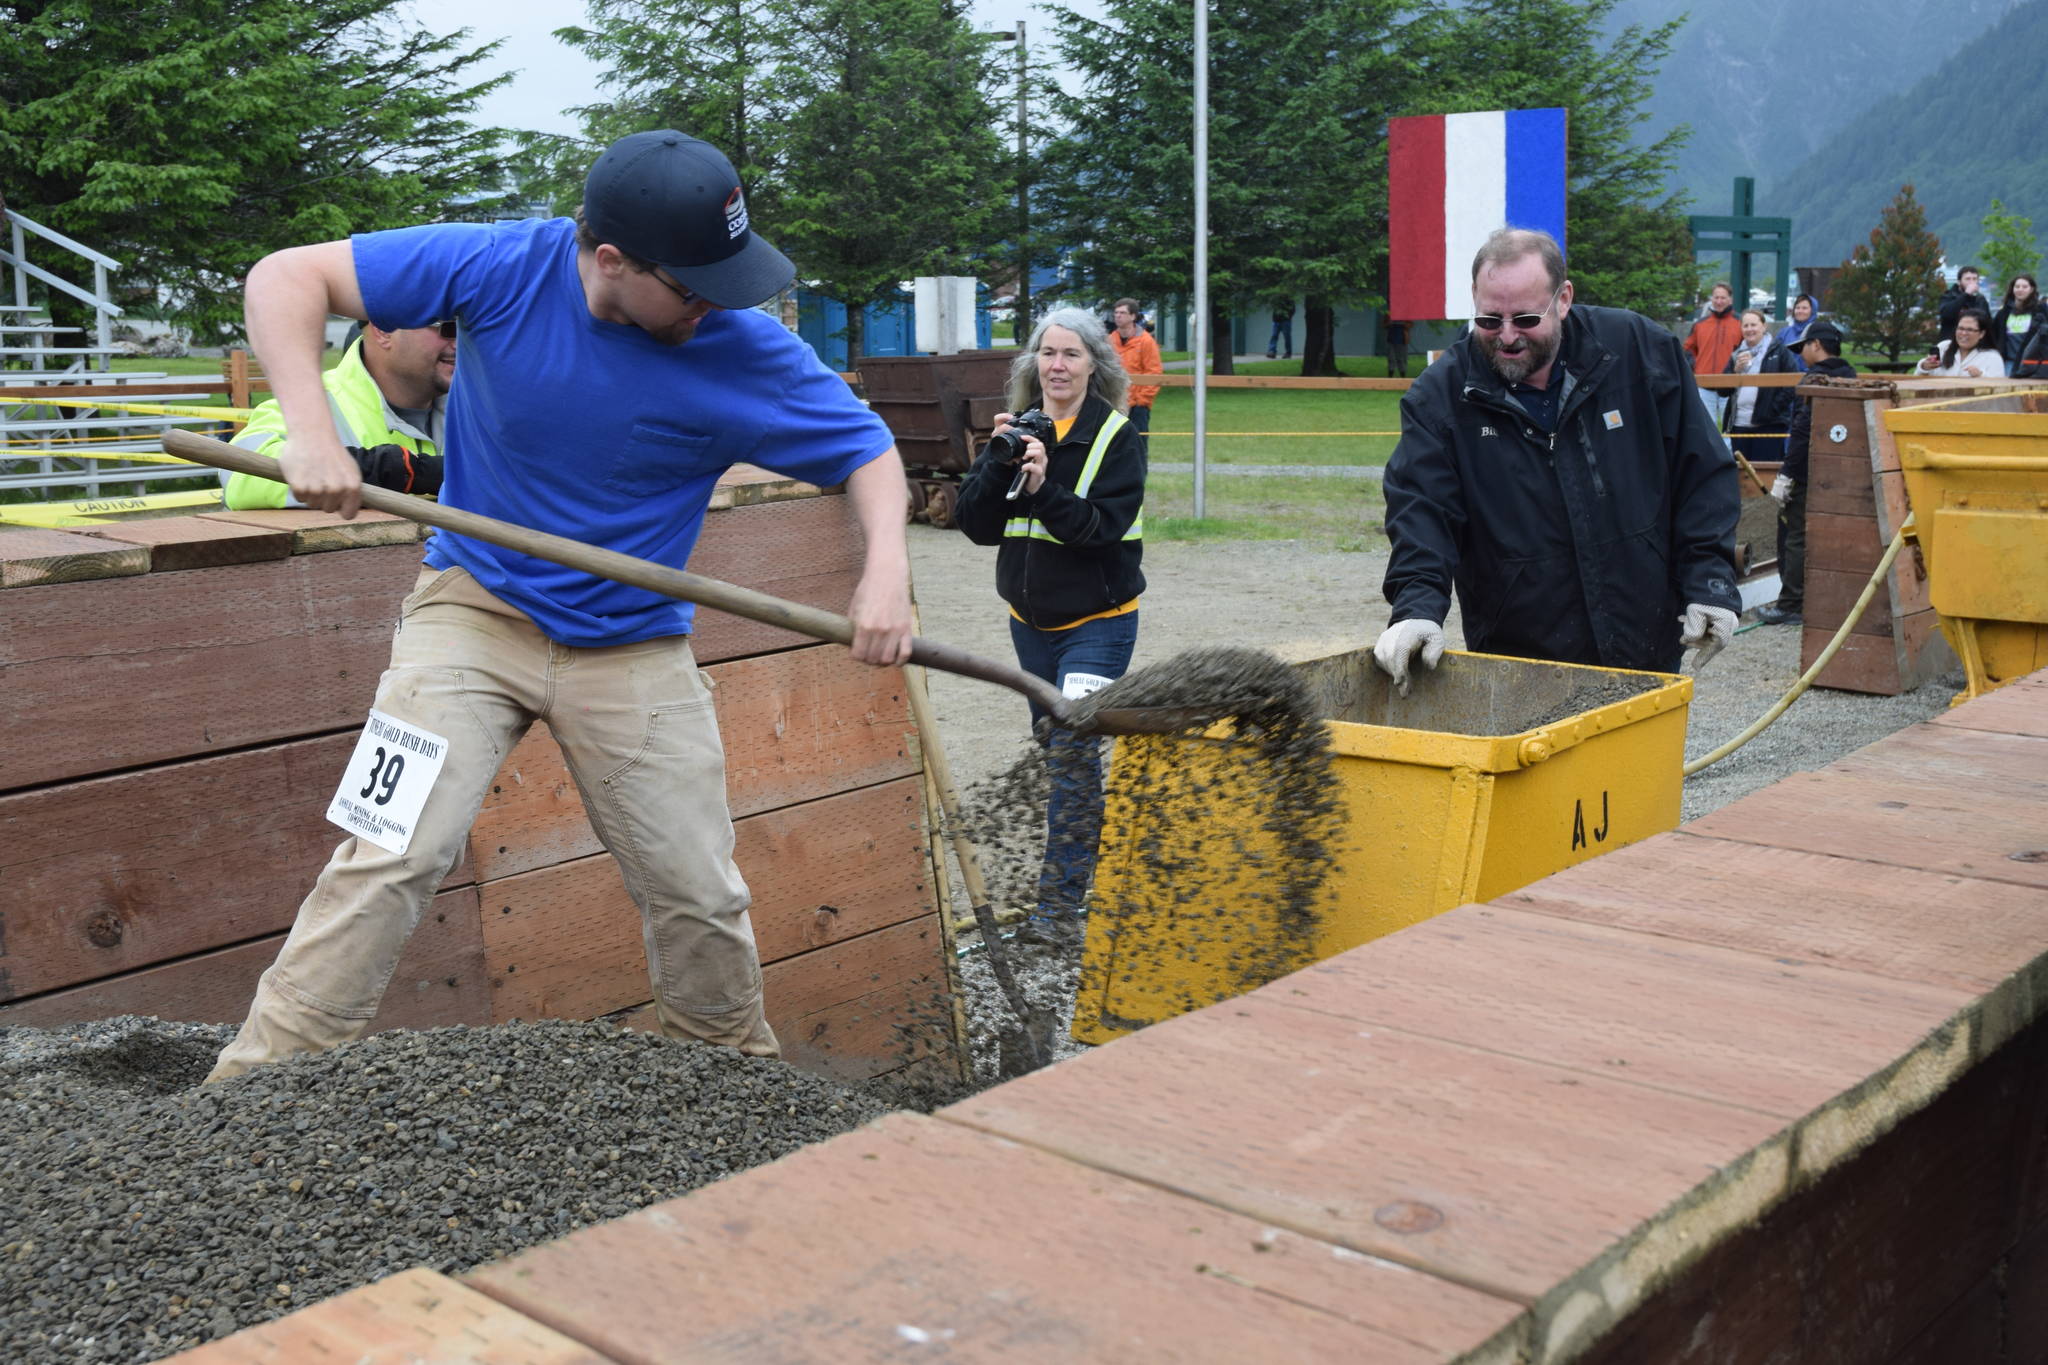 Conner Ryan takes his turn at the men’s hand mucking event at Gold Rush Days on Saturday. (Kevin Gullufsen | Juneau Empire)